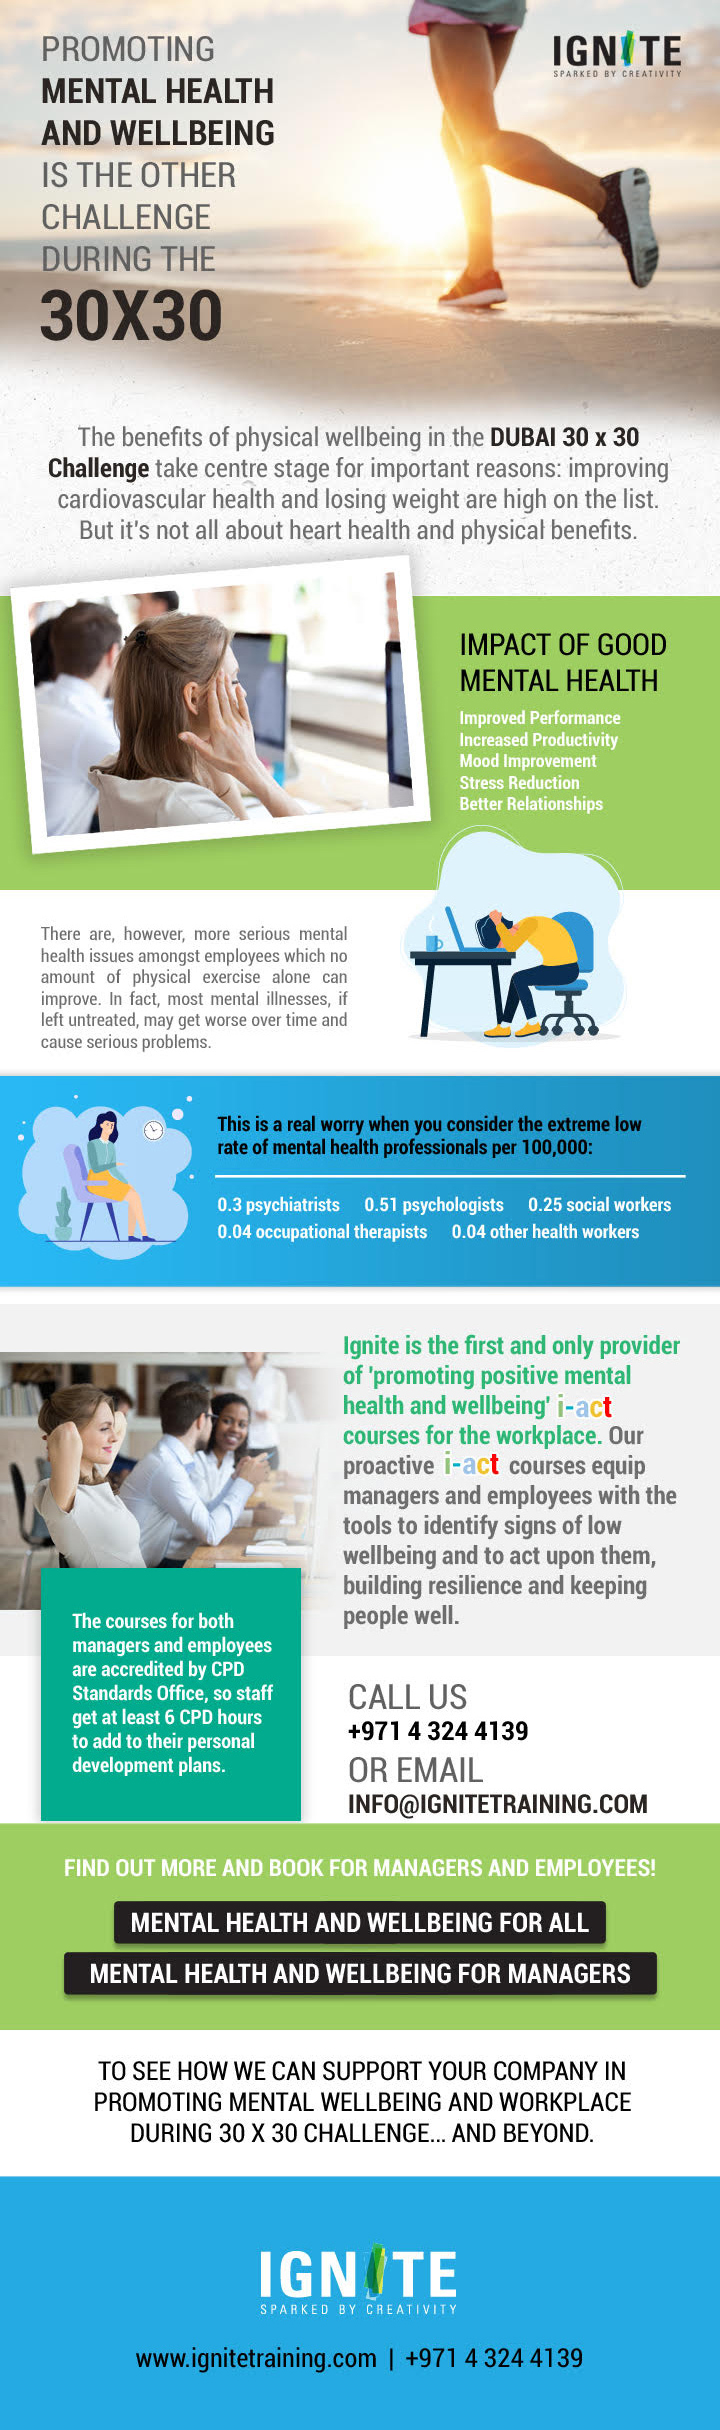 Promoting Mental Health and Wellbeing in the Workplace